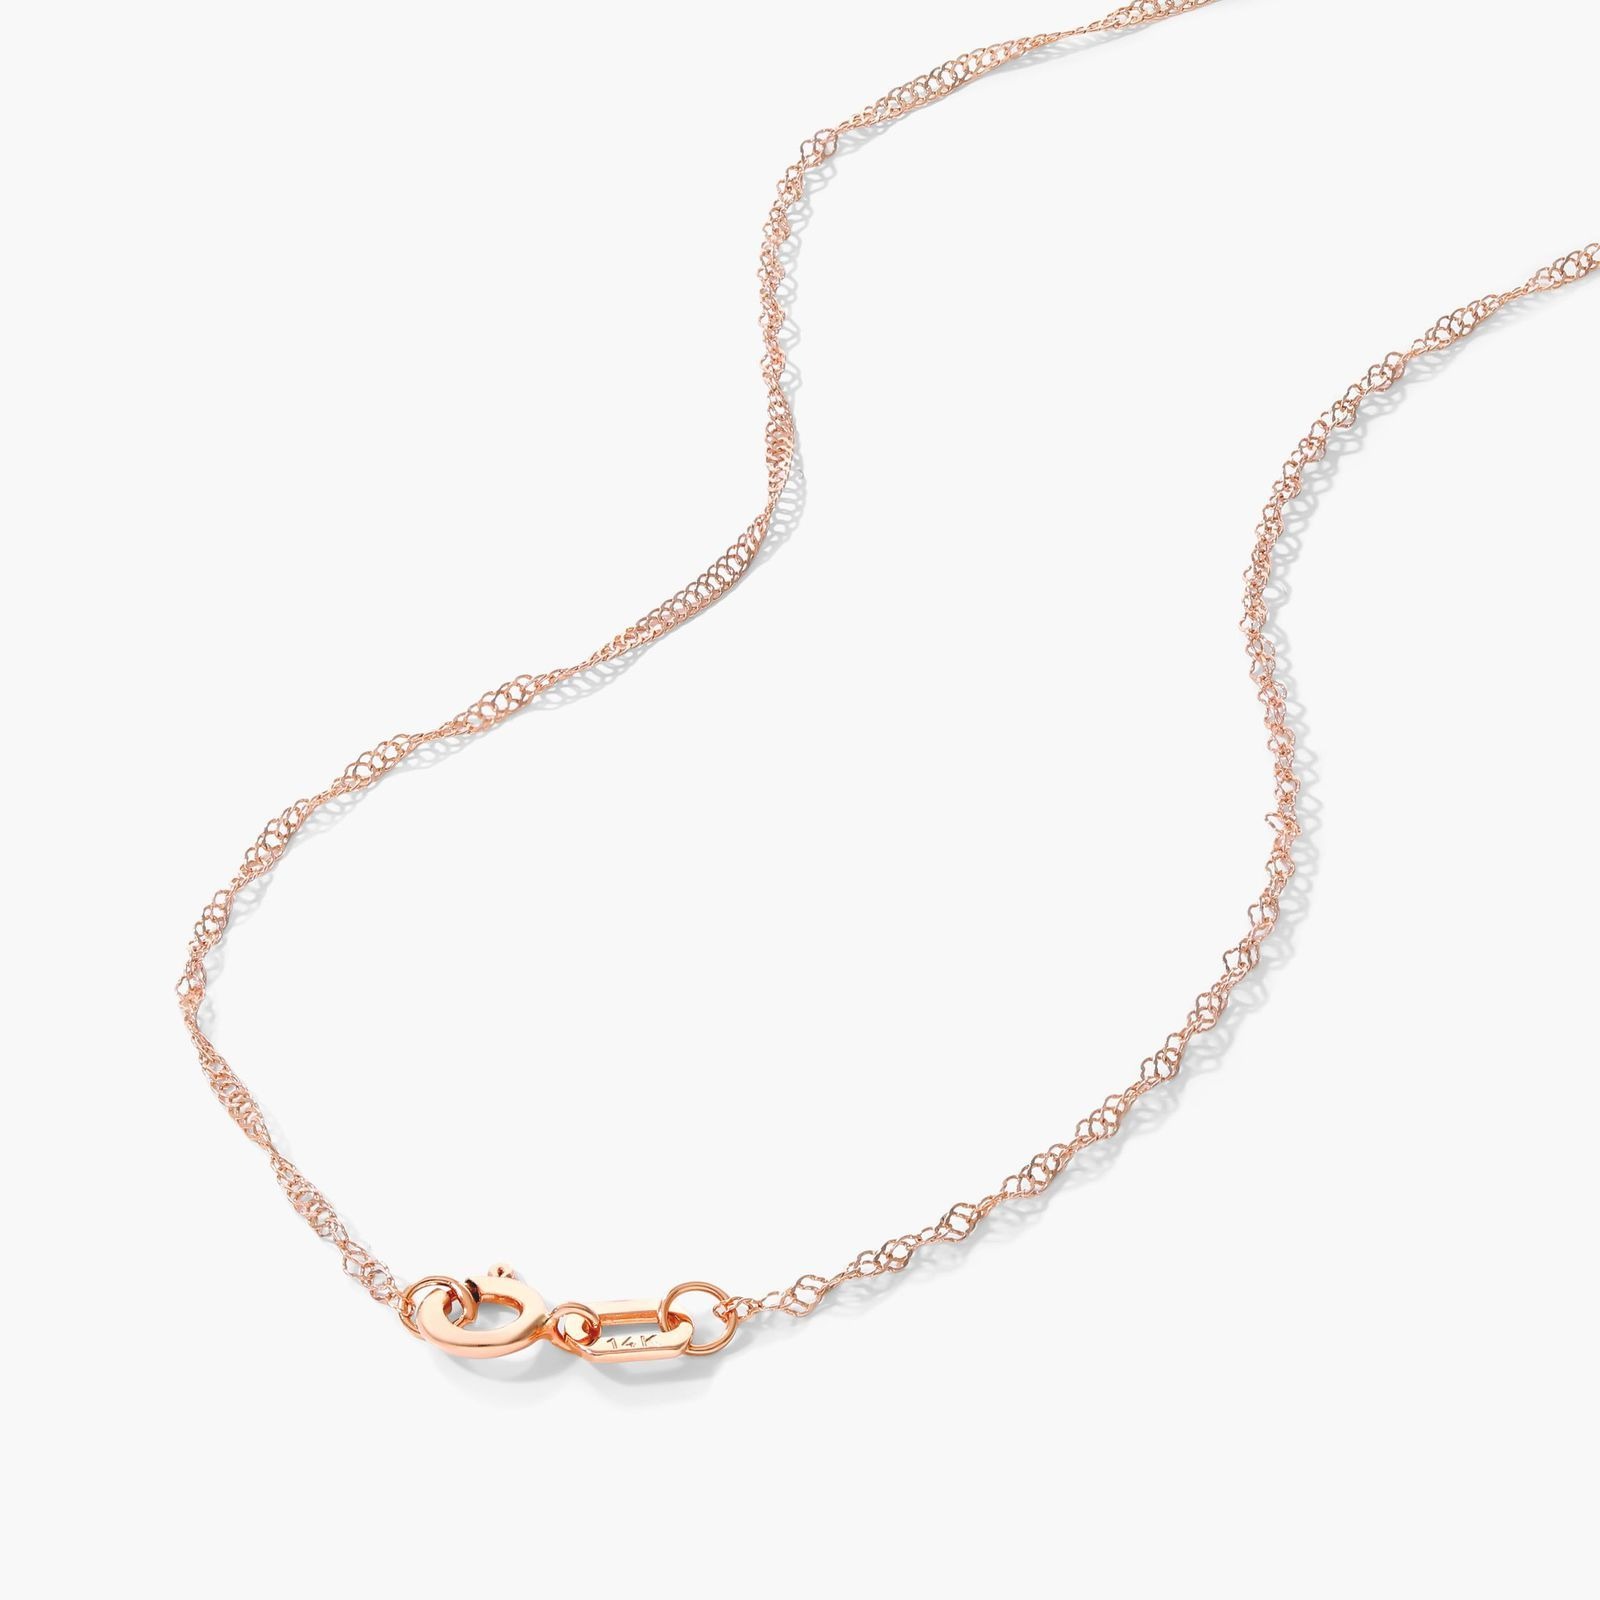 Rose gold necklace chain